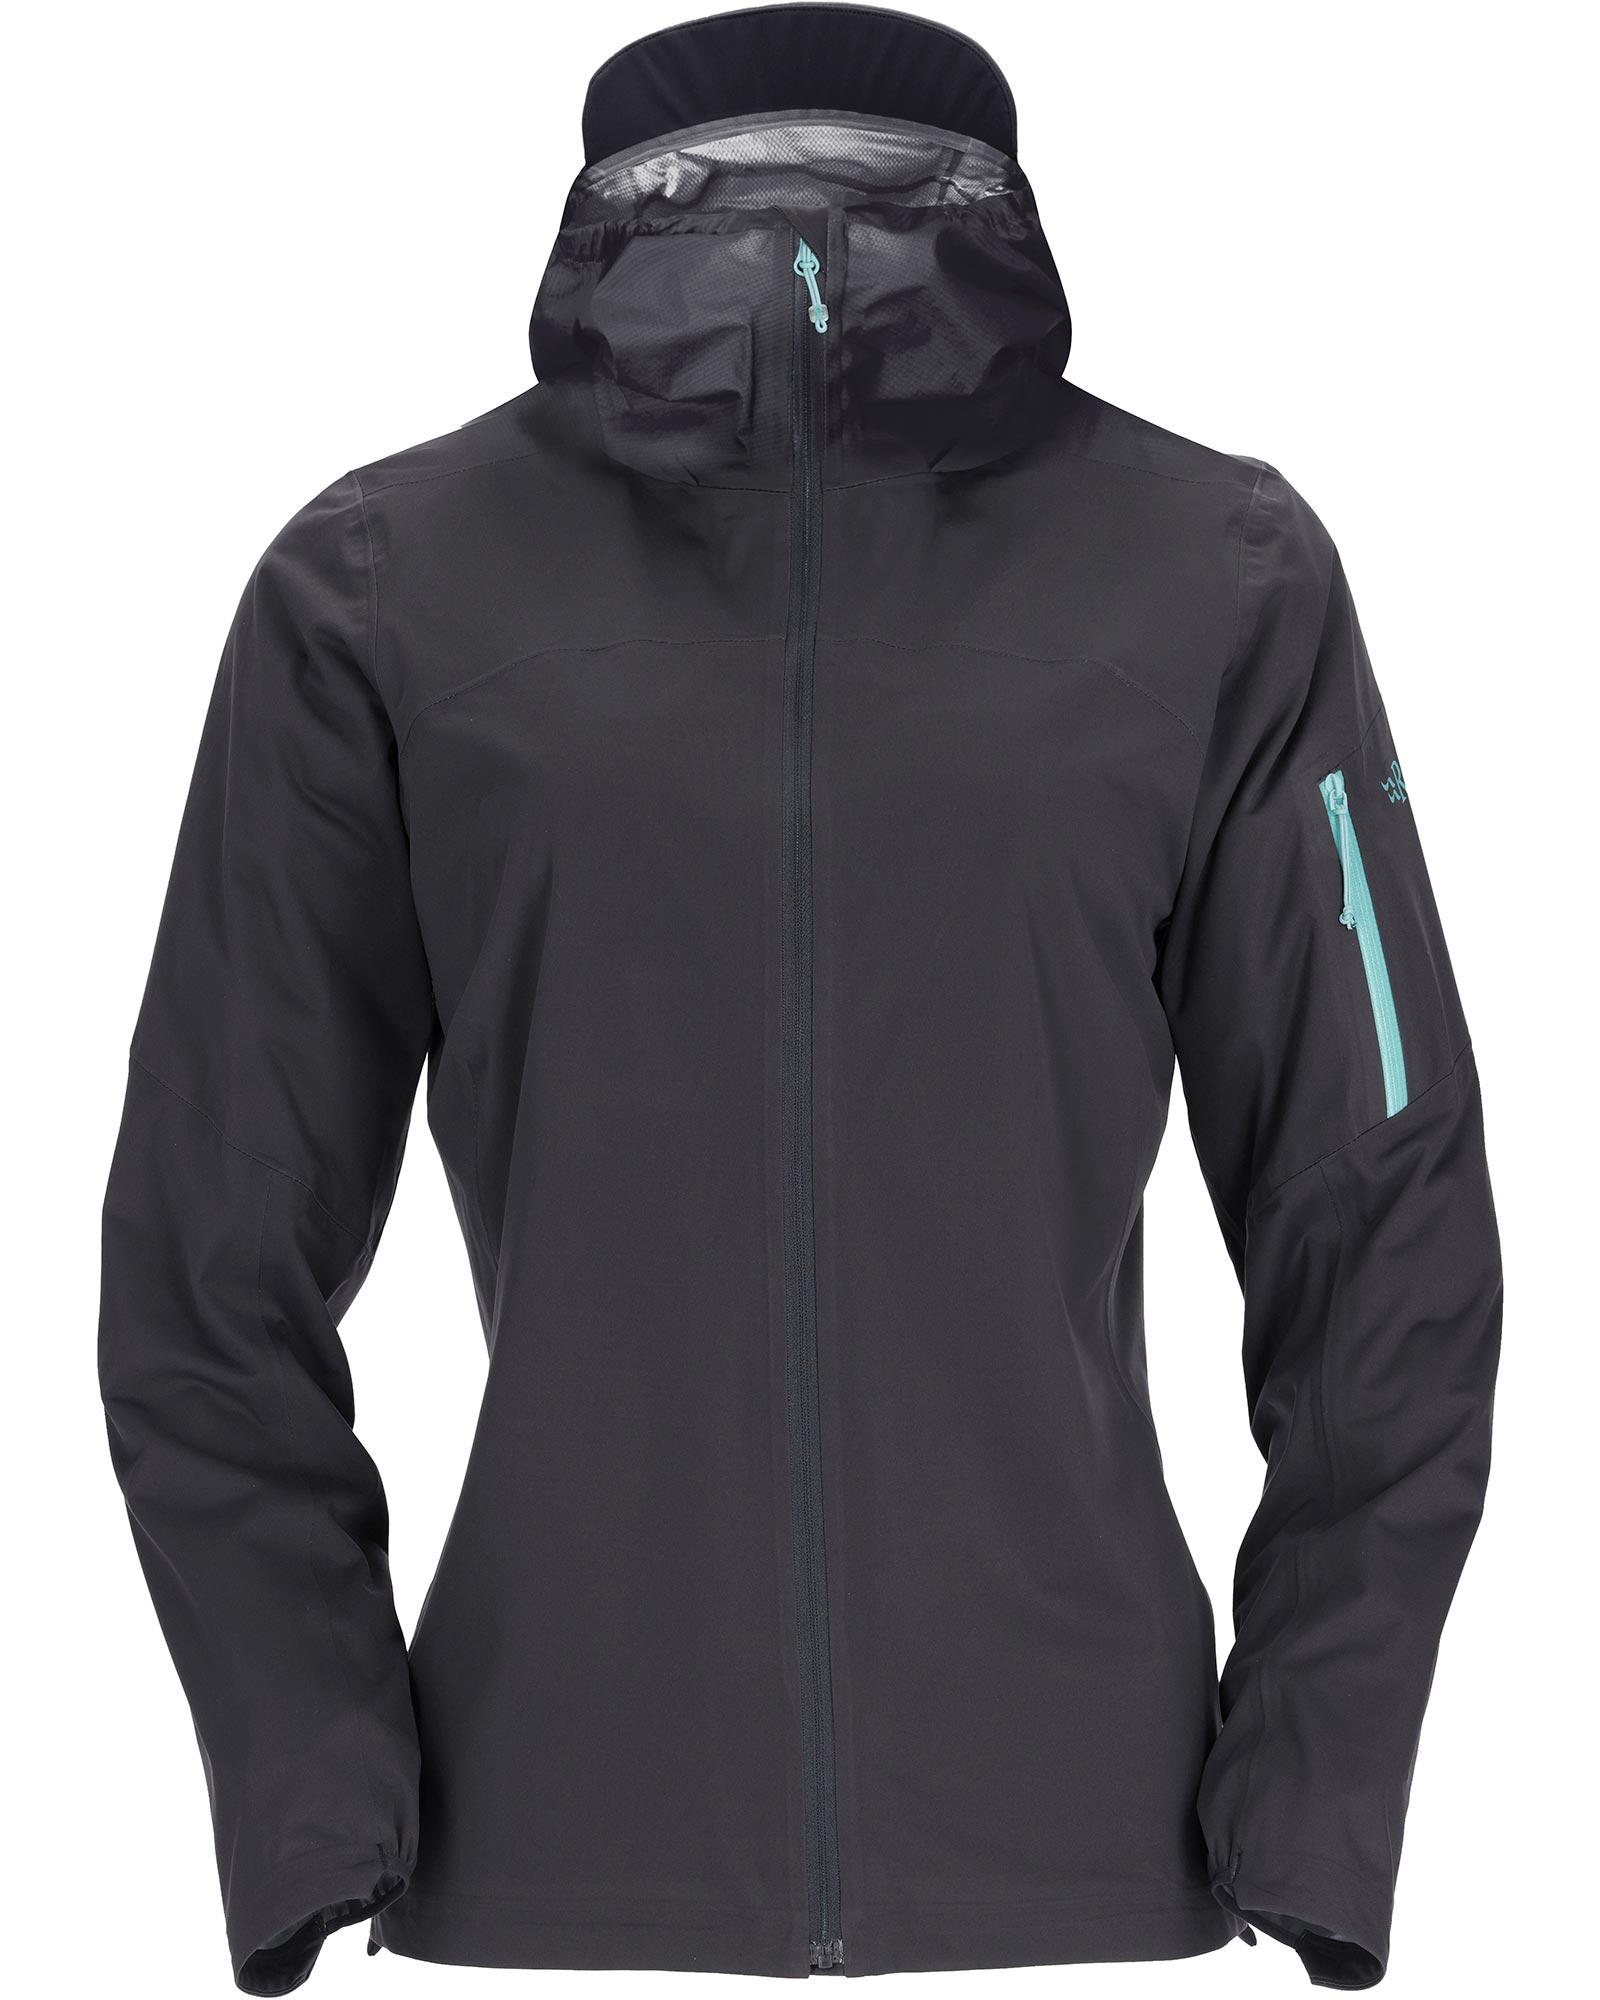 Rab Kinetic Ultra Women’s Jacket - Anthracite 14